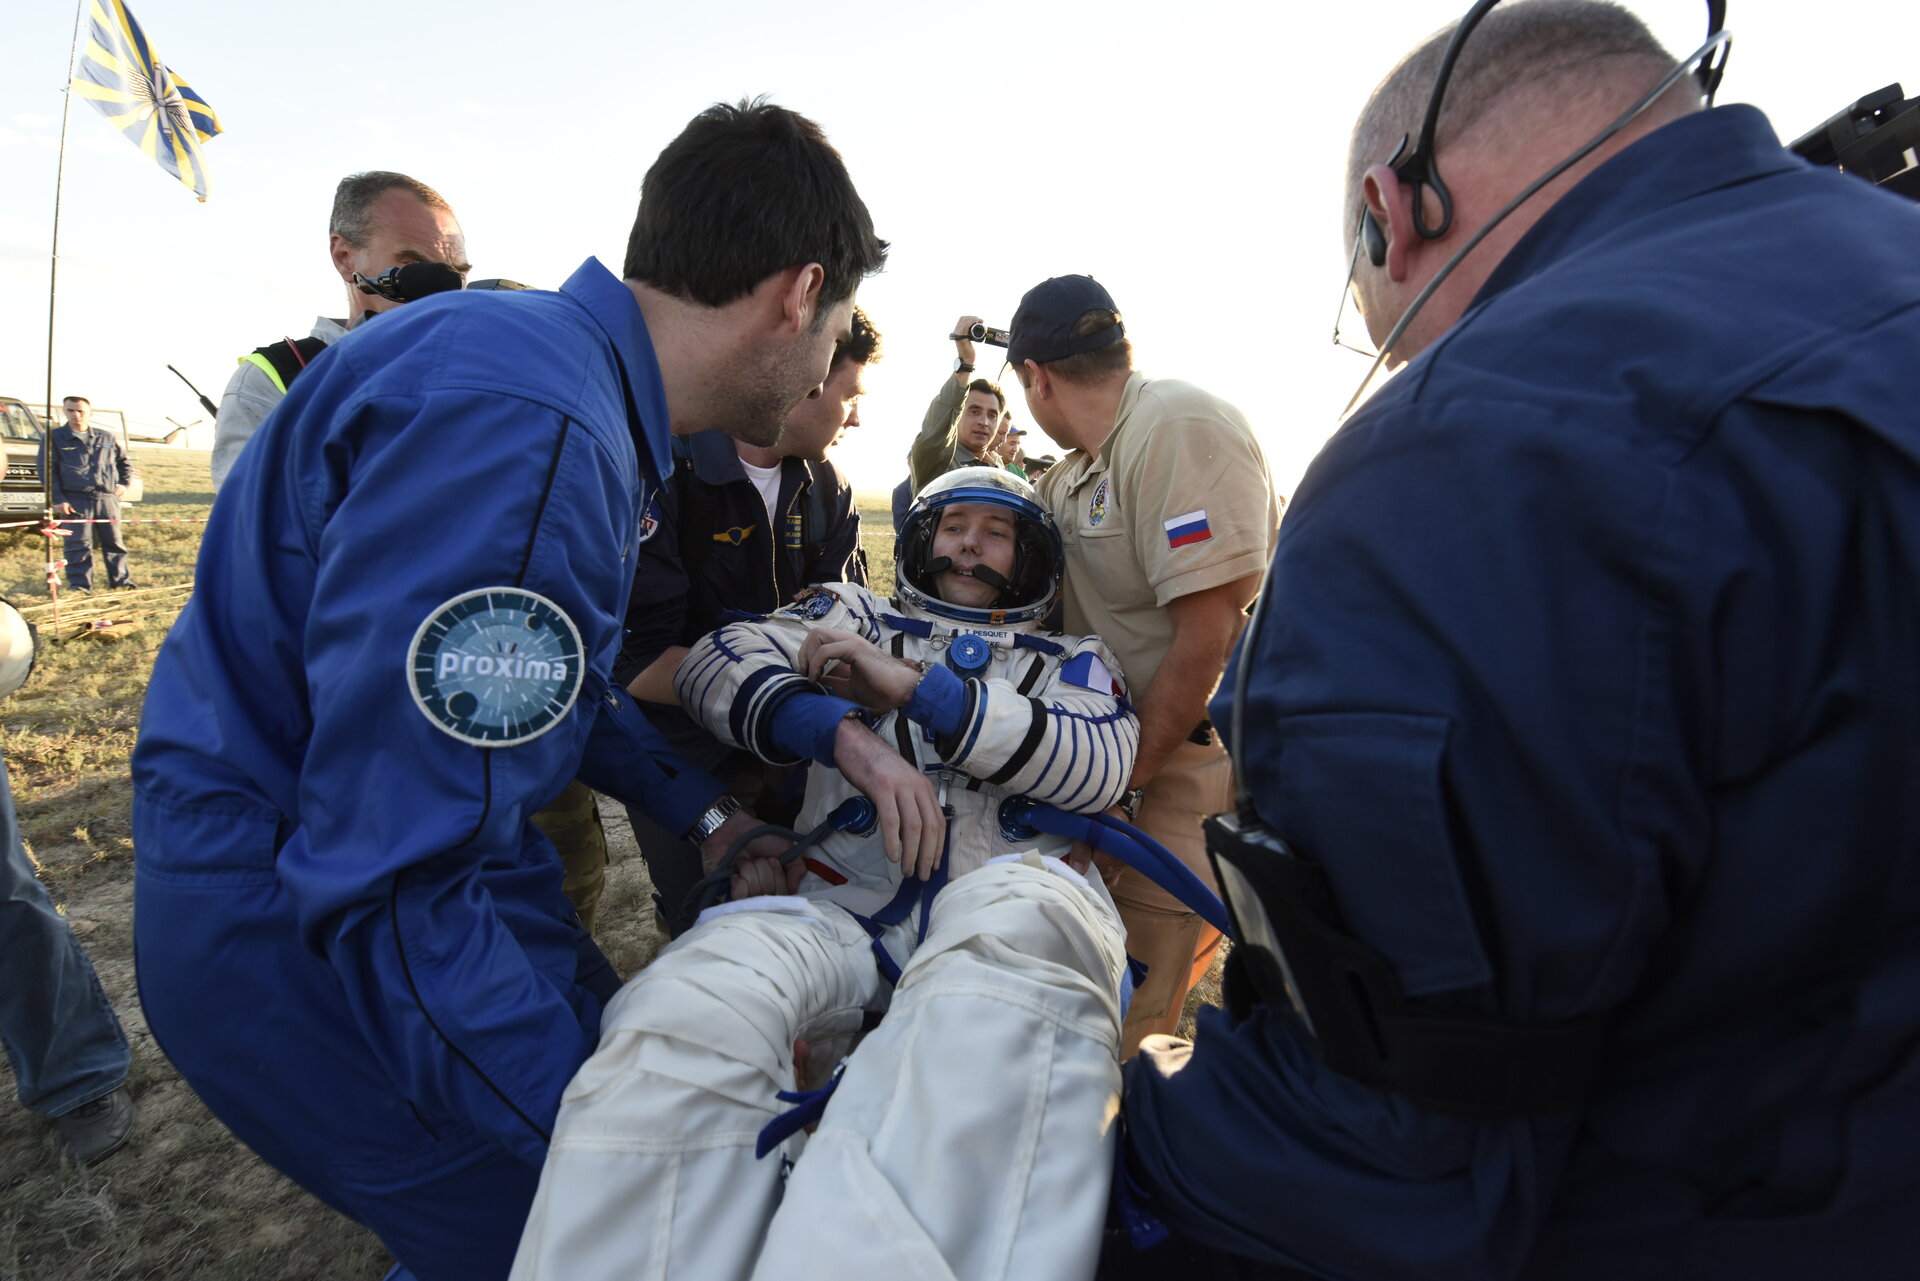 Thomas was carried out of his Soyuz capsule